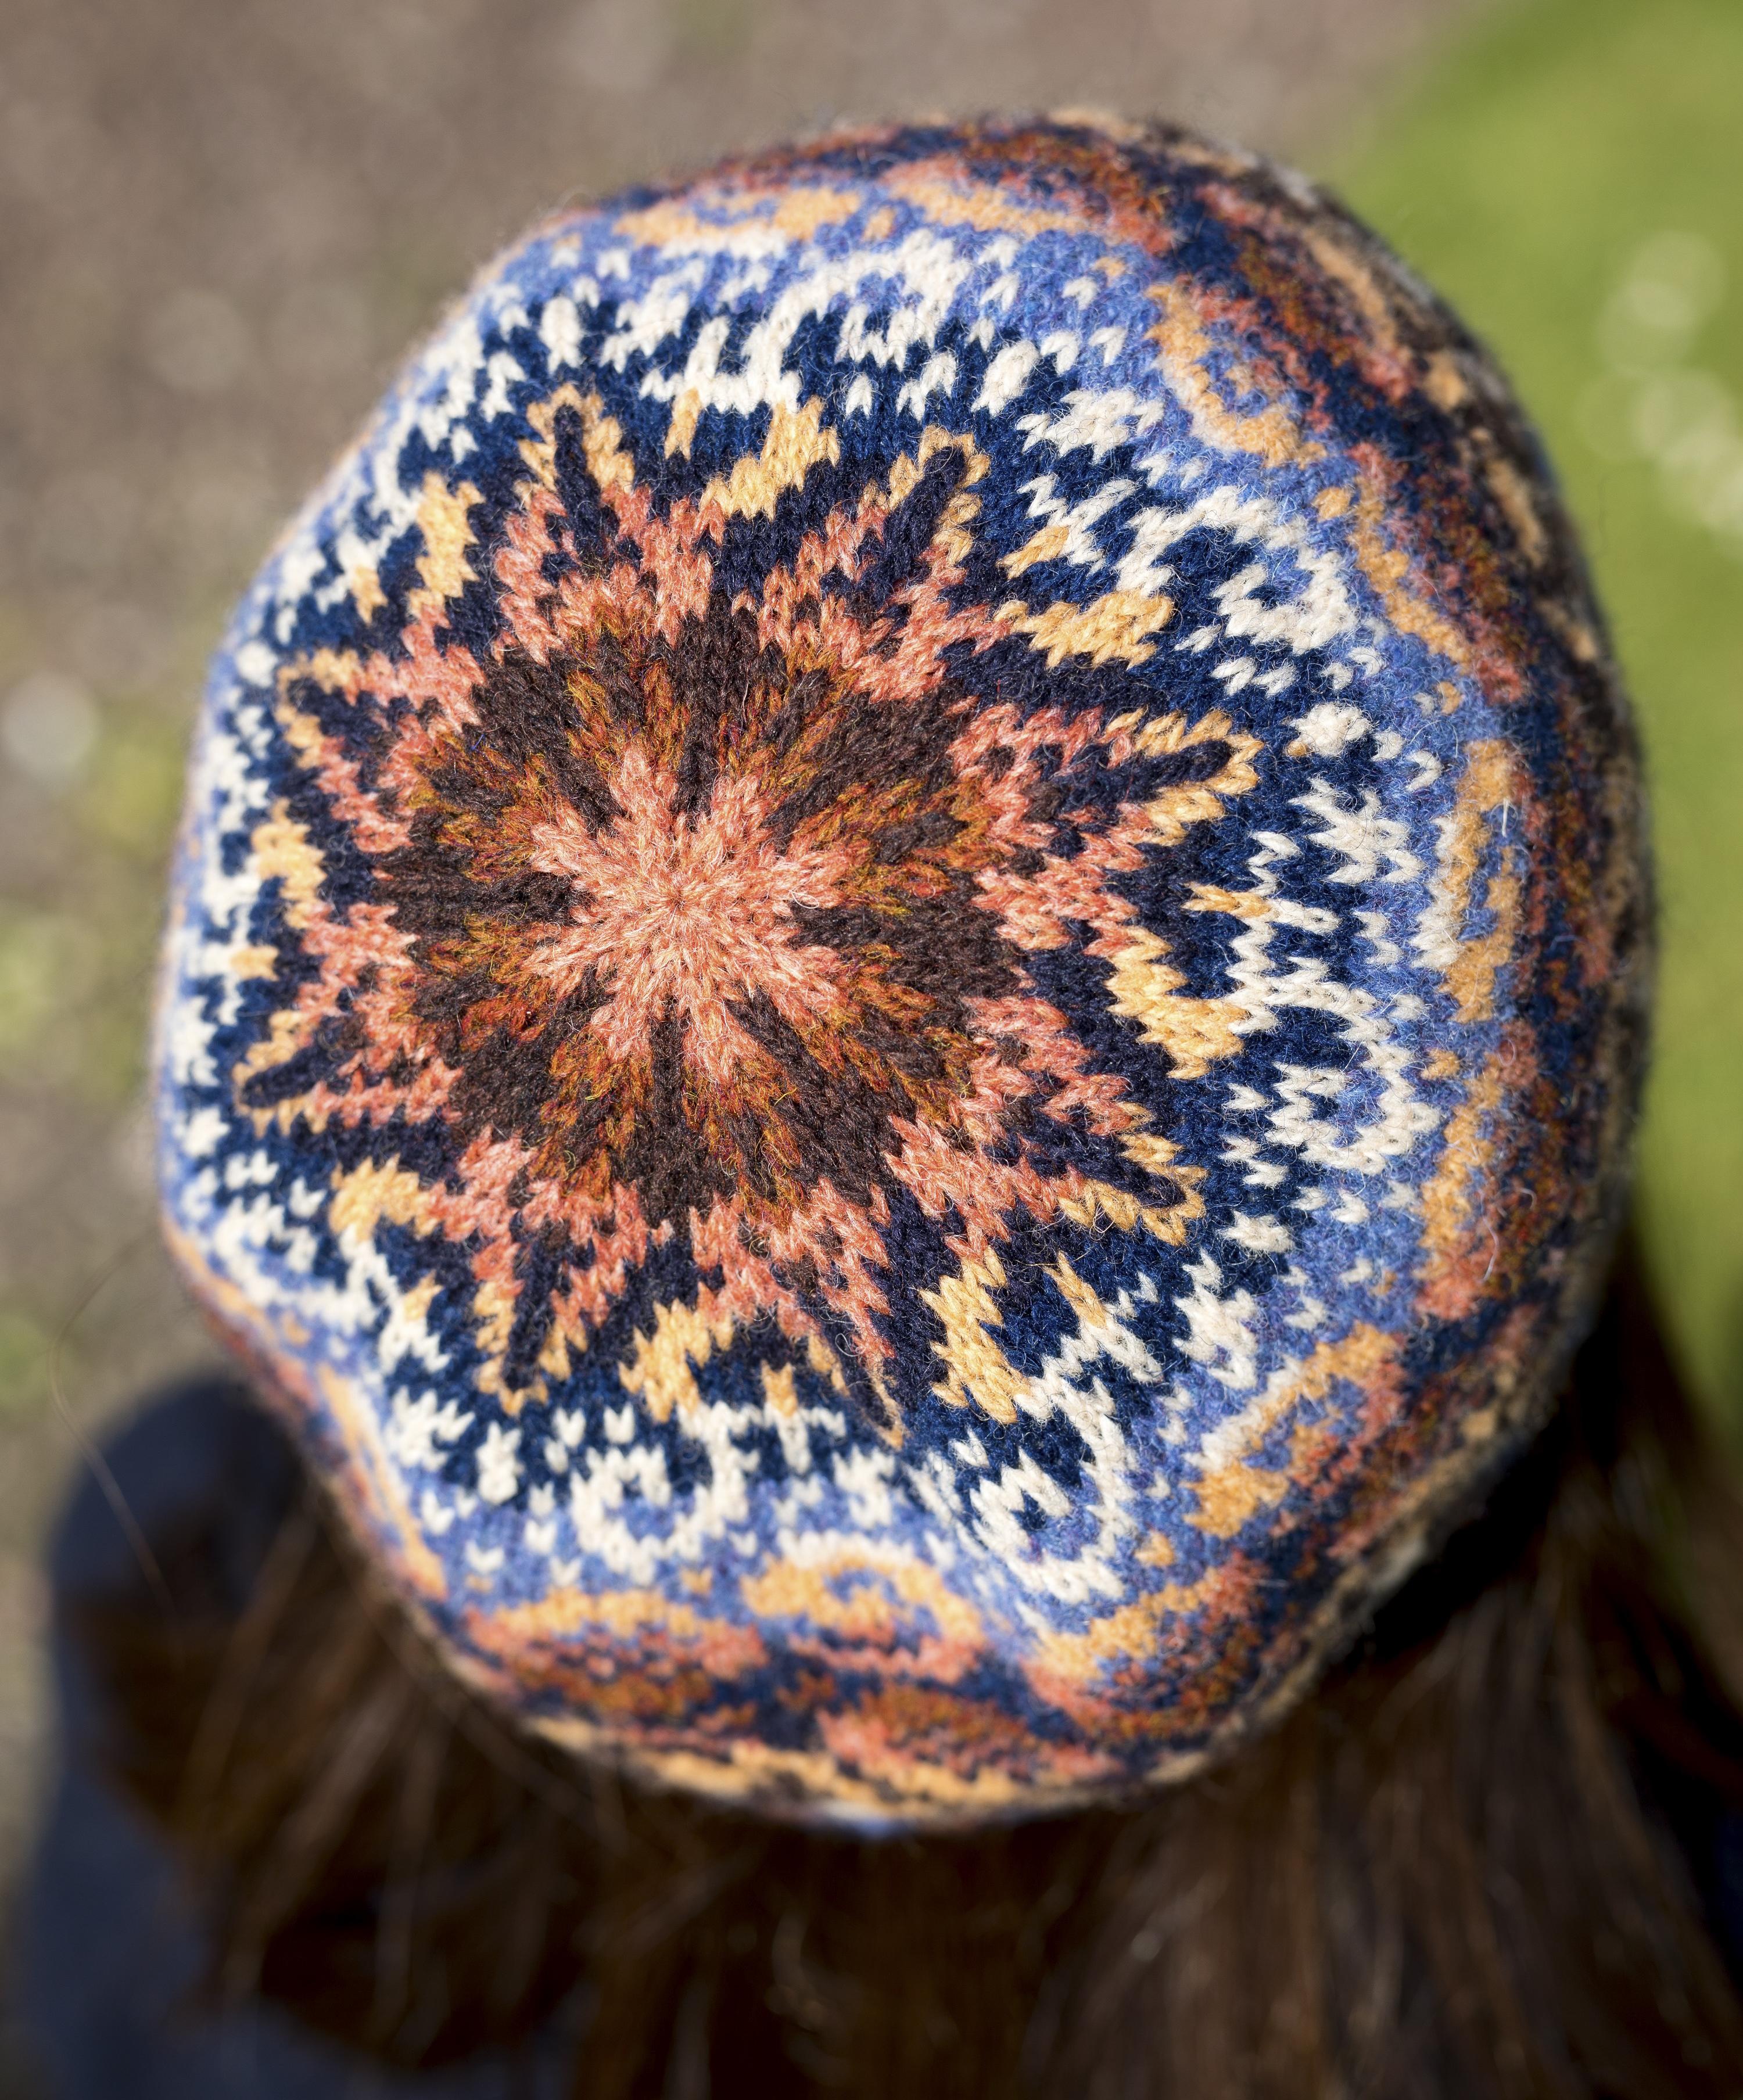 The crown of a stranded colourwork hat, in which the stitches decrease evenly in spokes towards the centre of the hat. Worked in a palette of corals, golden shades and deep warm blues and browns.